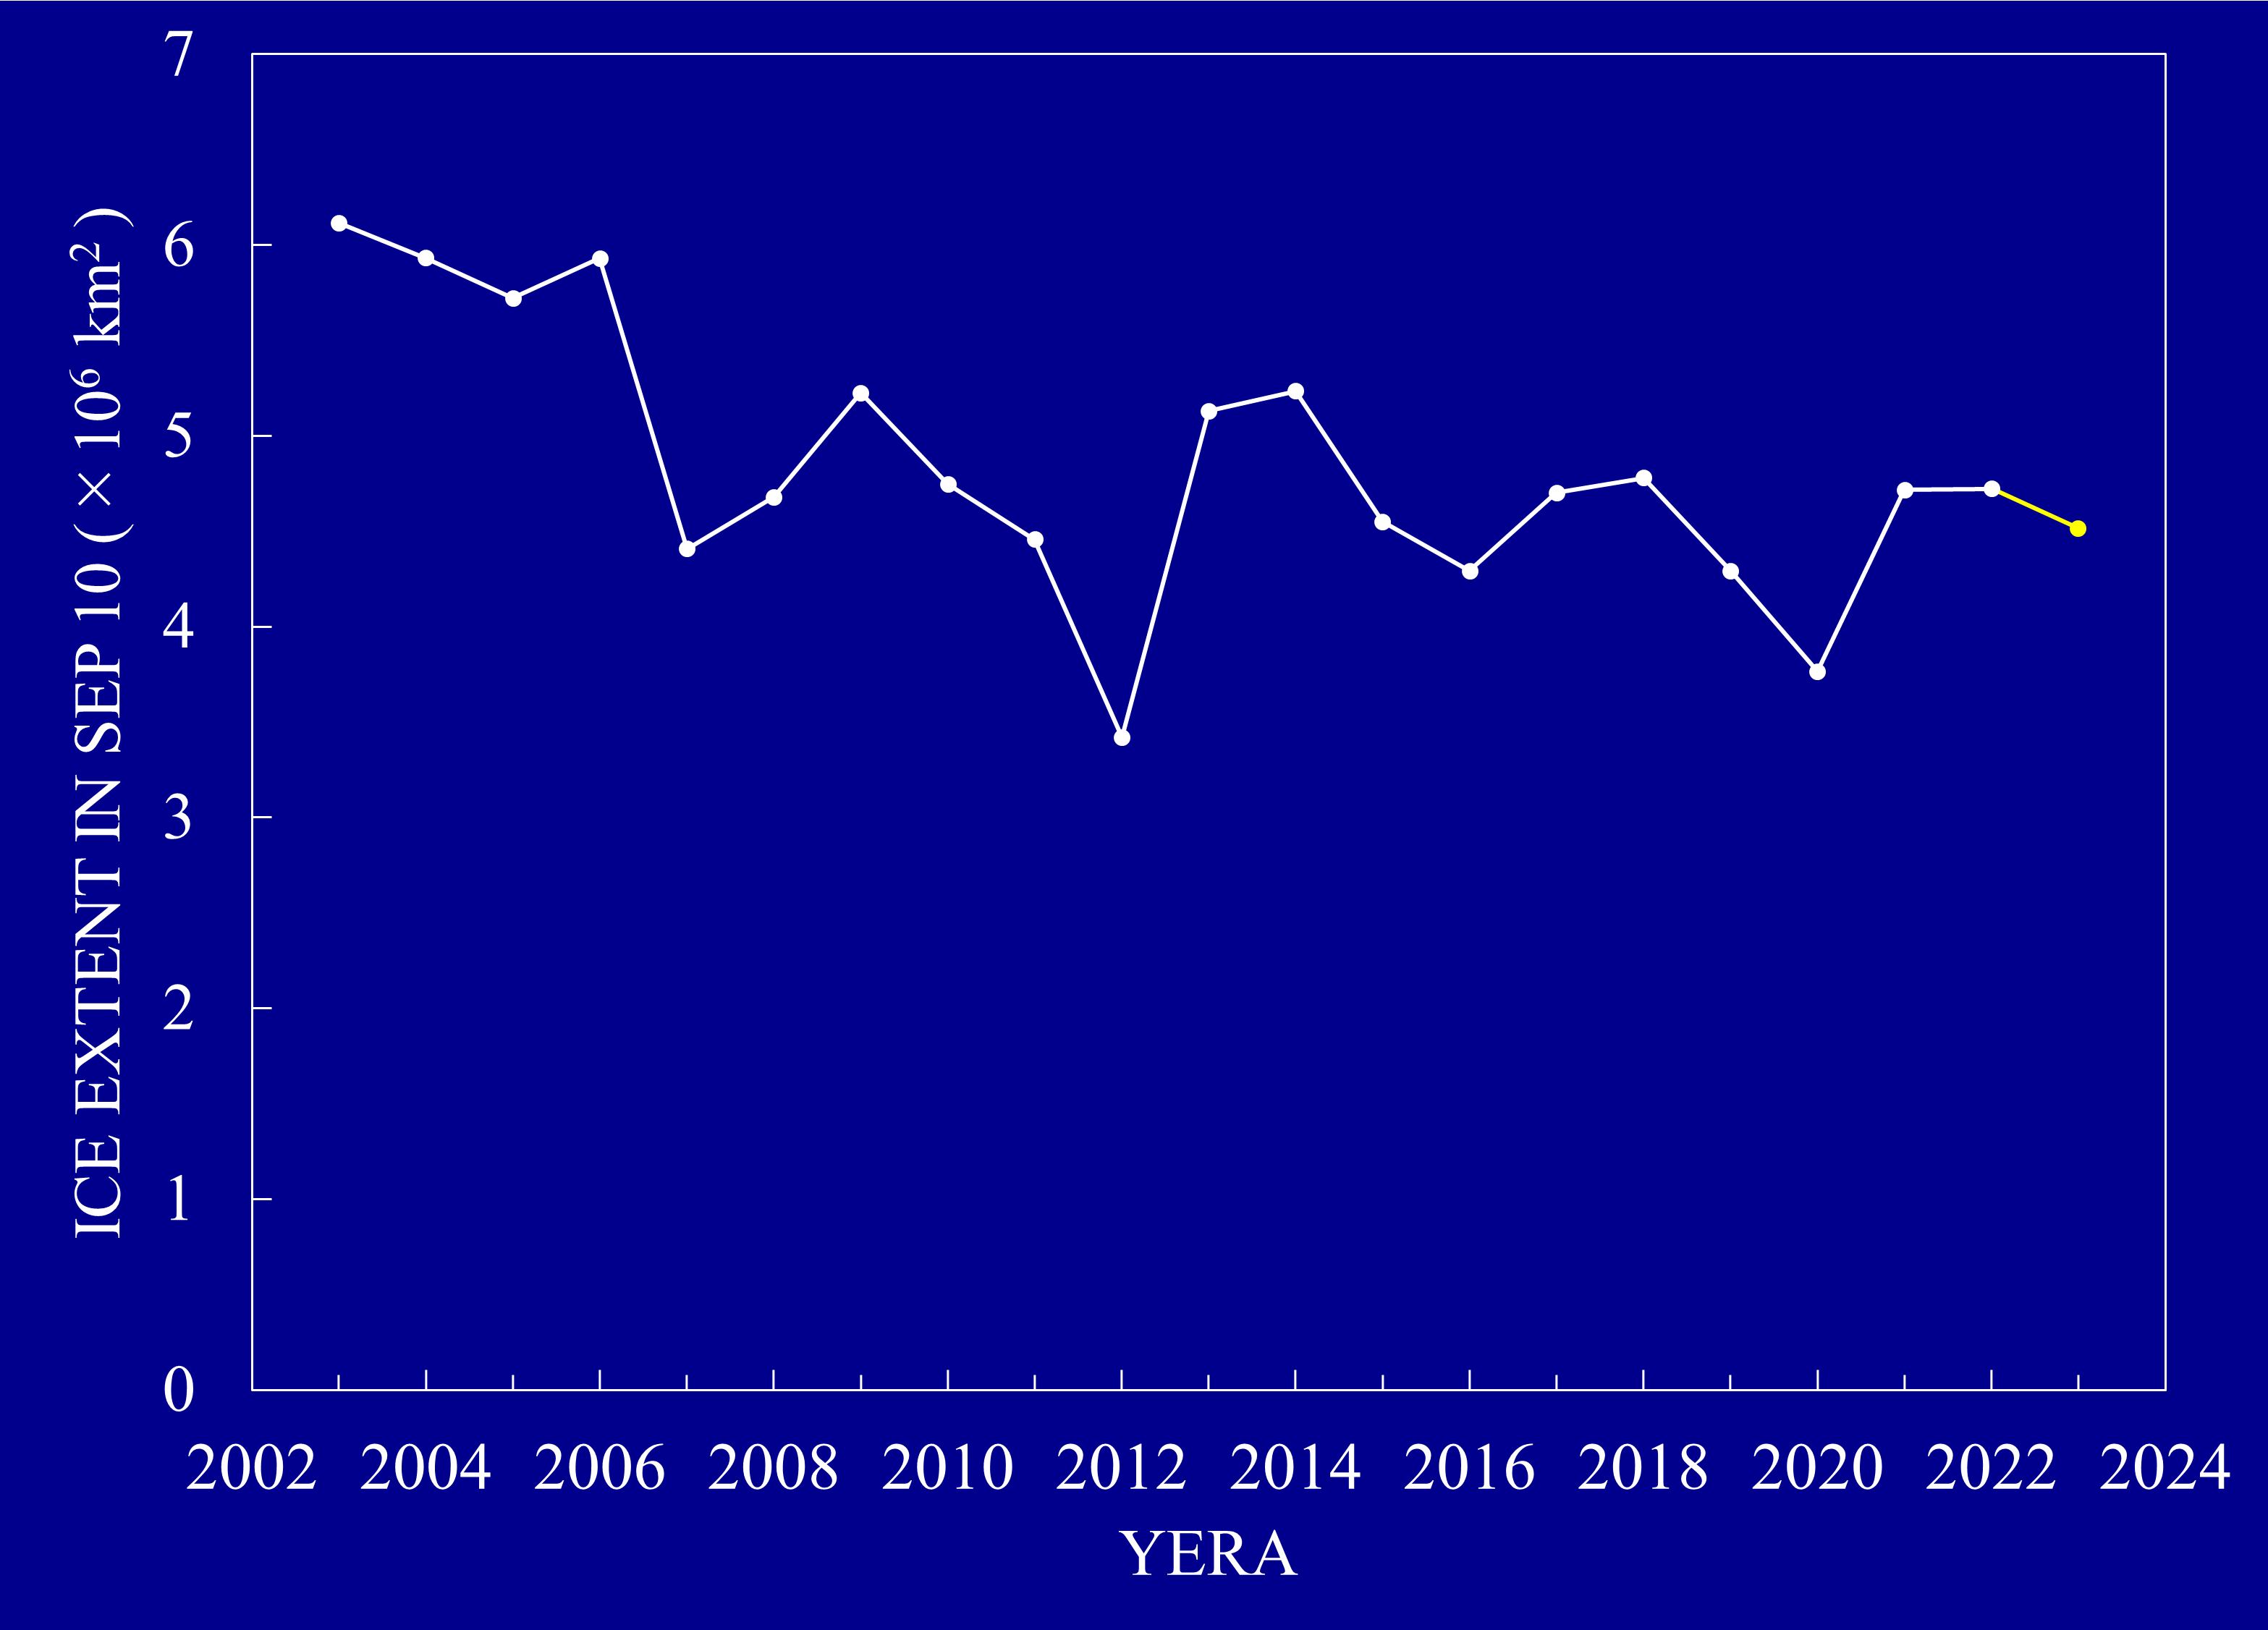 Annual change in minimum sea ice extent since 2003